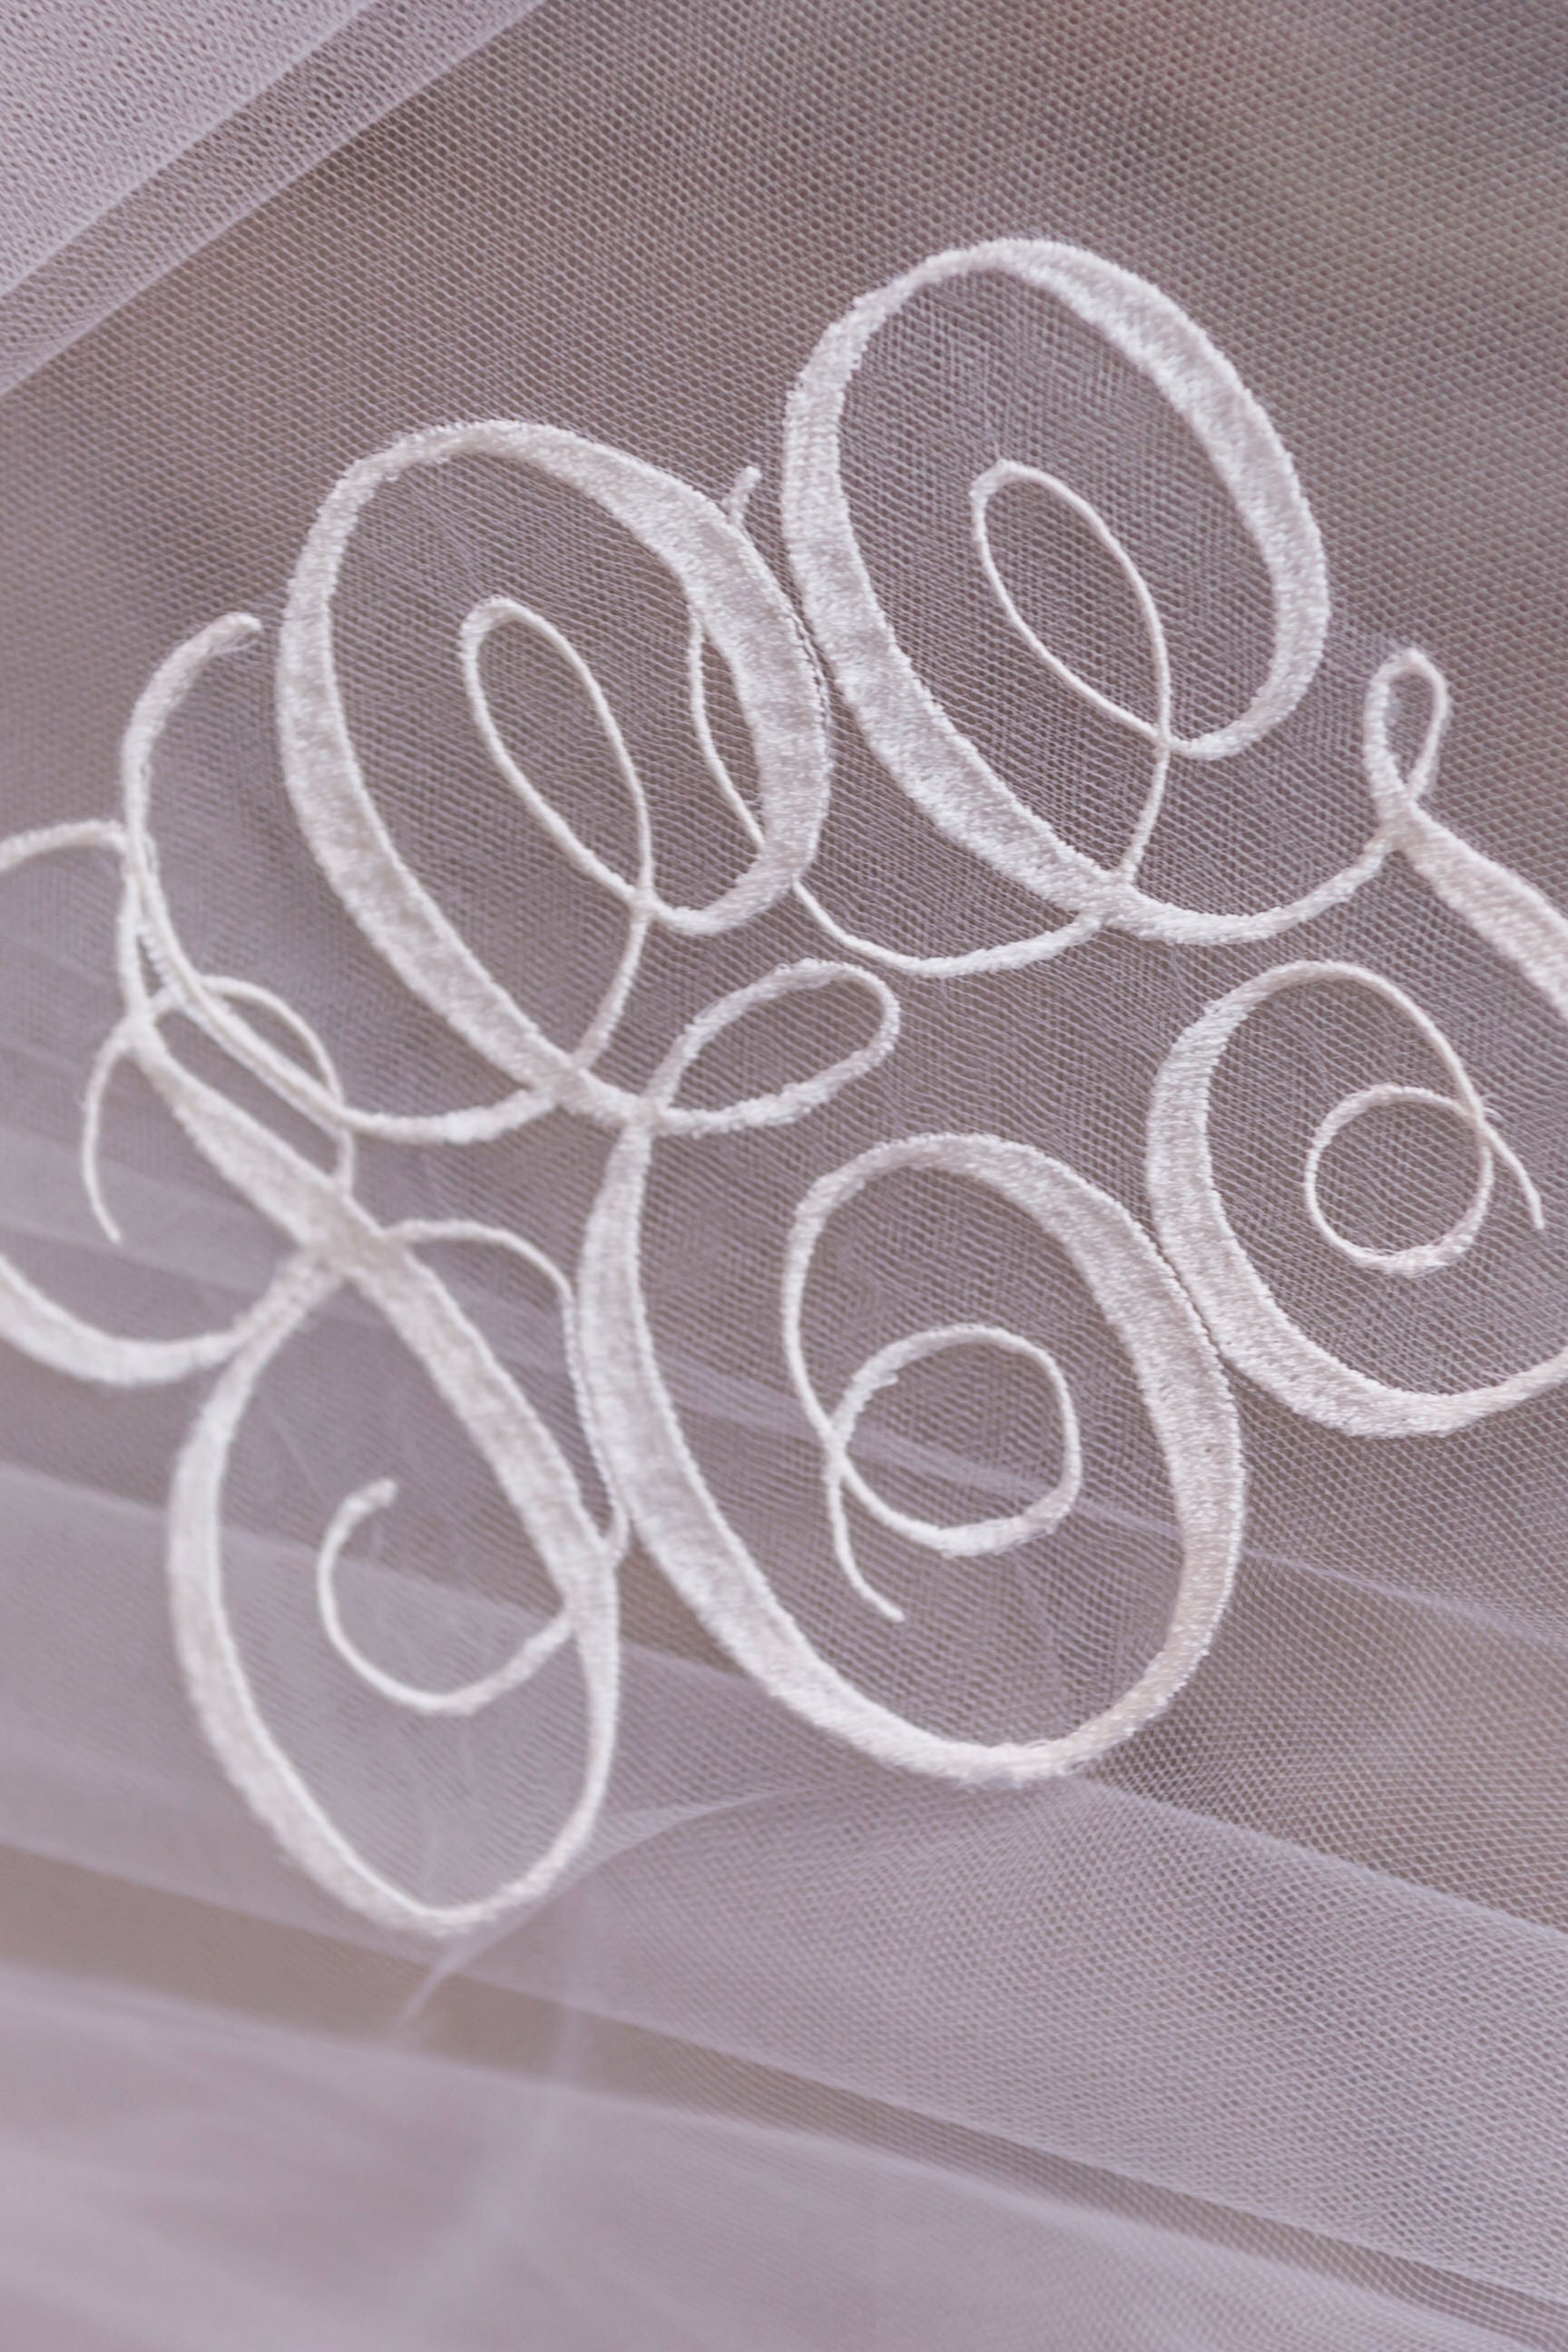 One Blushing Bride Small Embroidered Monogrammed Initials, Name, or Date on Wedding Veil Off White / Diamond